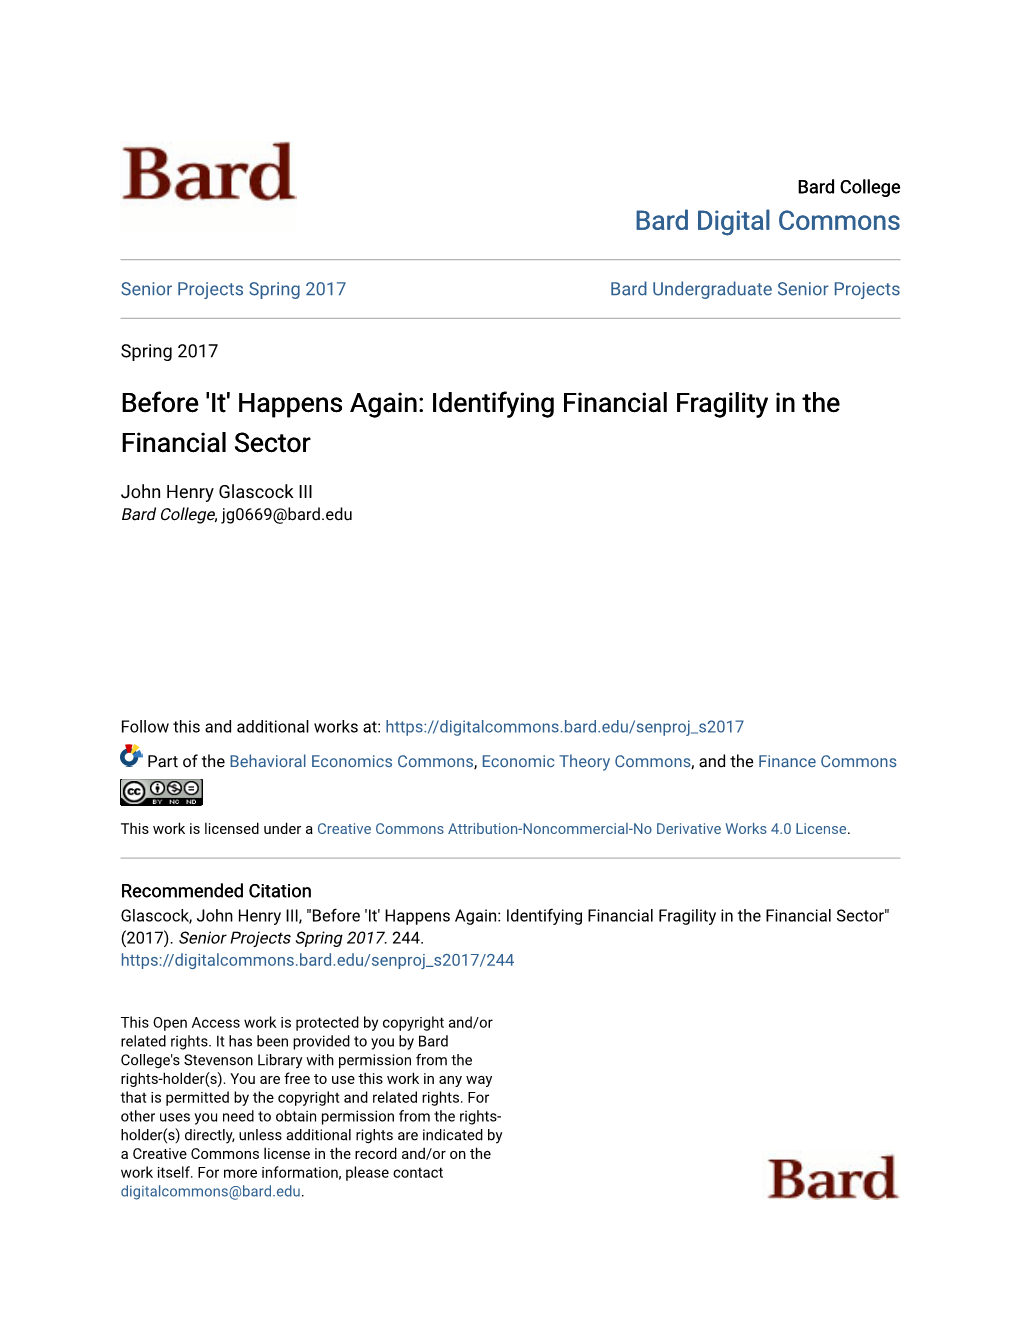 Identifying Financial Fragility in the Financial Sector